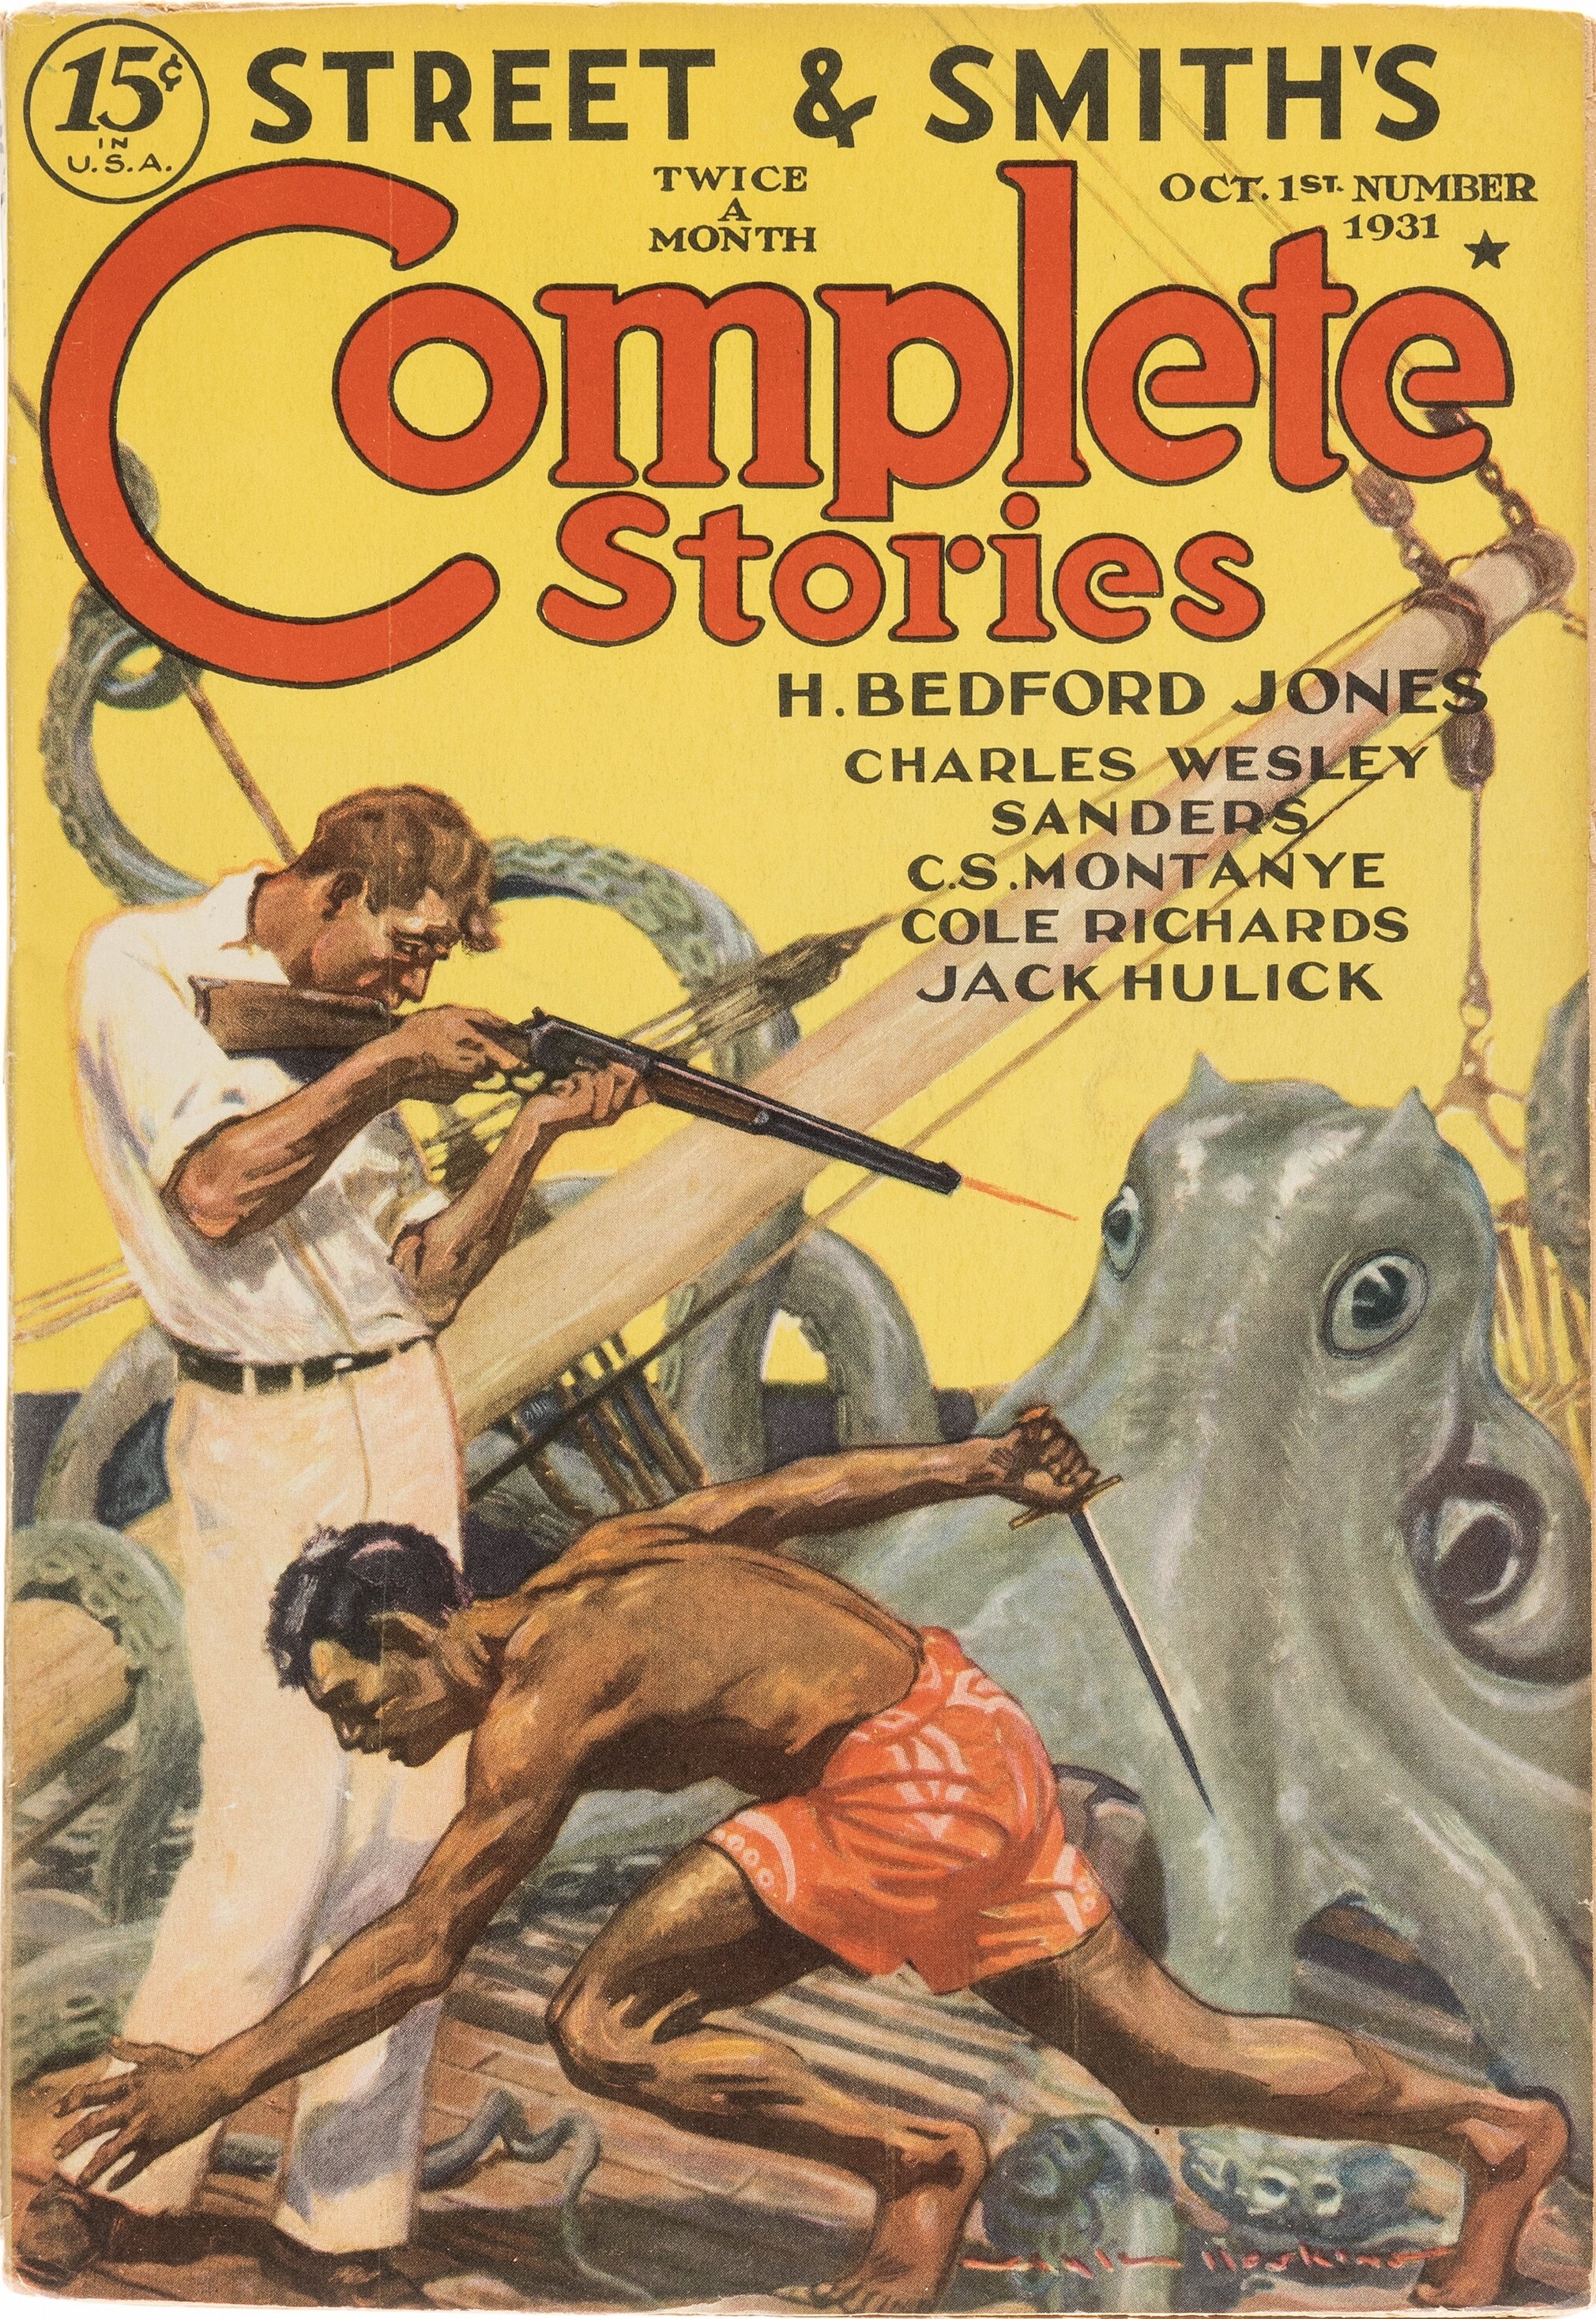 Complete Stories - October 1st, 1931